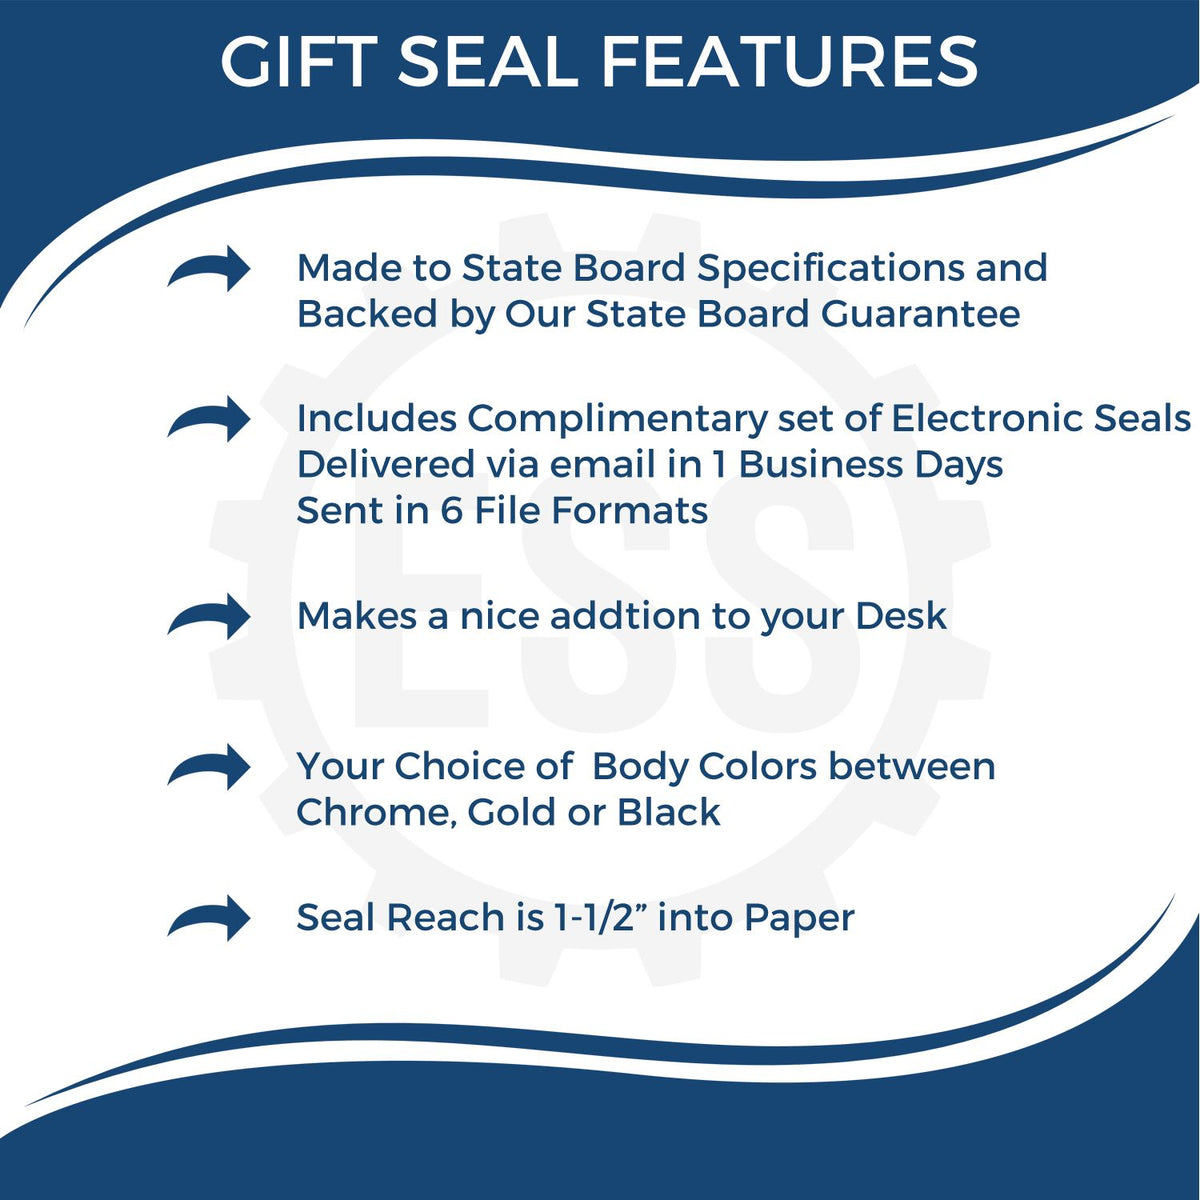 A picture of an infographic highlighting the selling points for the Gift Iowa Architect Seal